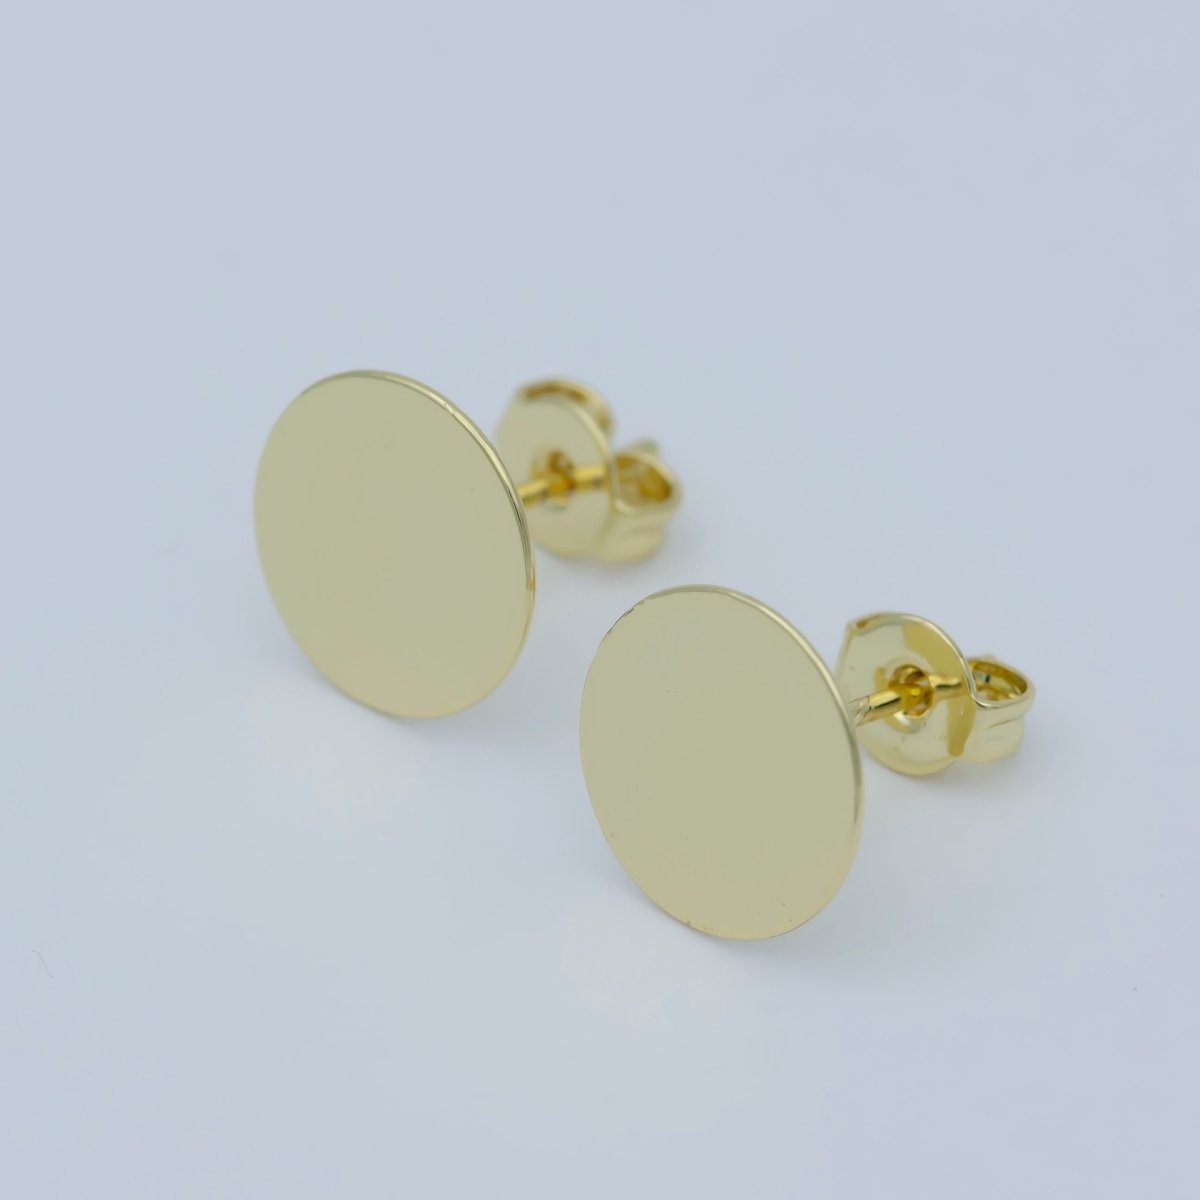 6mm, 8mm, 10mm Round Gold Earrings • Gold Stud Earrings • Circle Stud Round Tack Disc • 14k Gold Filled Geometric Round Earrings Post Stud L-391 L-392 L-393 - DLUXCA